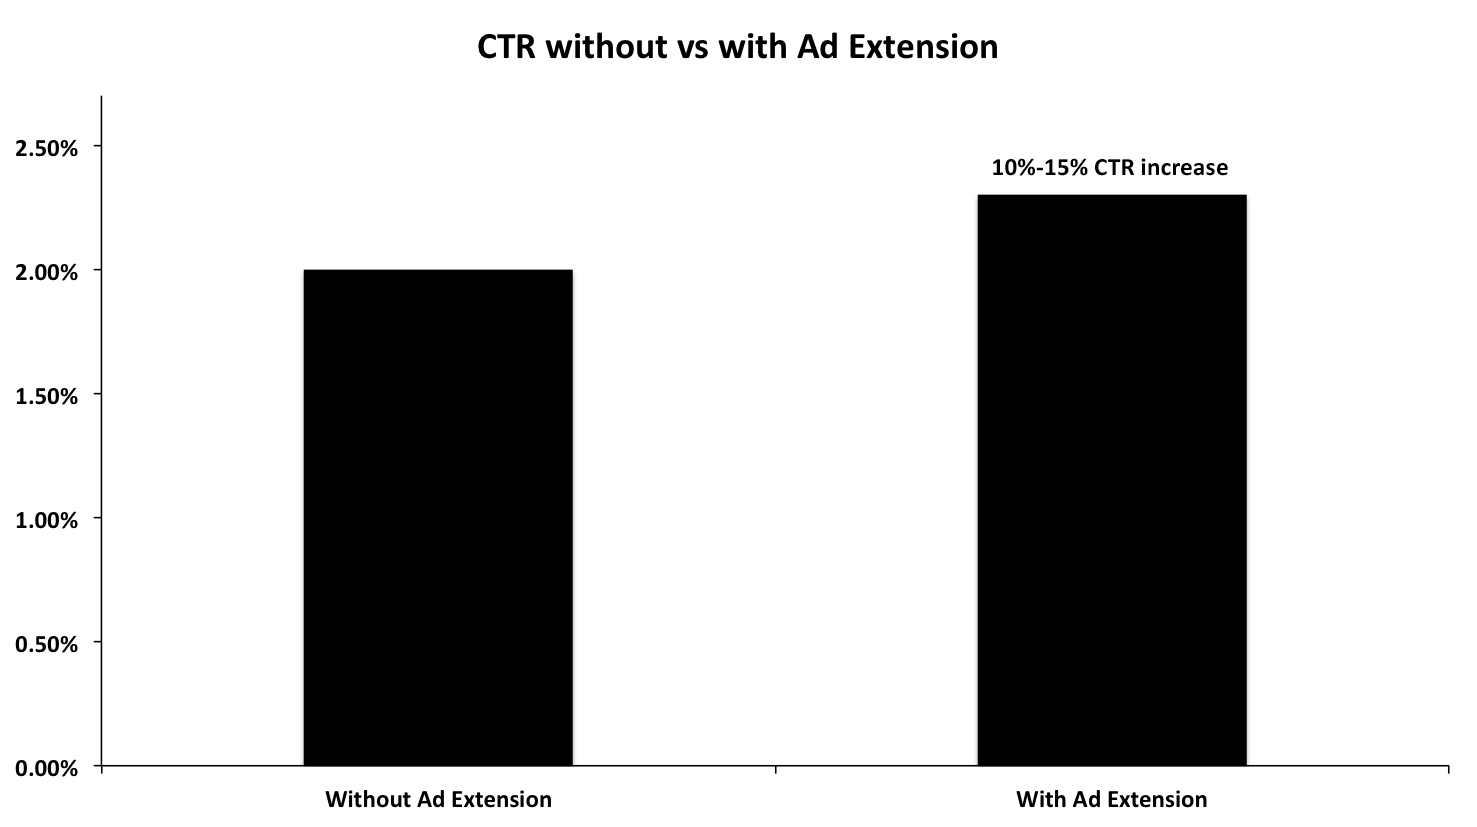 On average, ads using ad extensions see a 10%-15% increase in click-through rate.